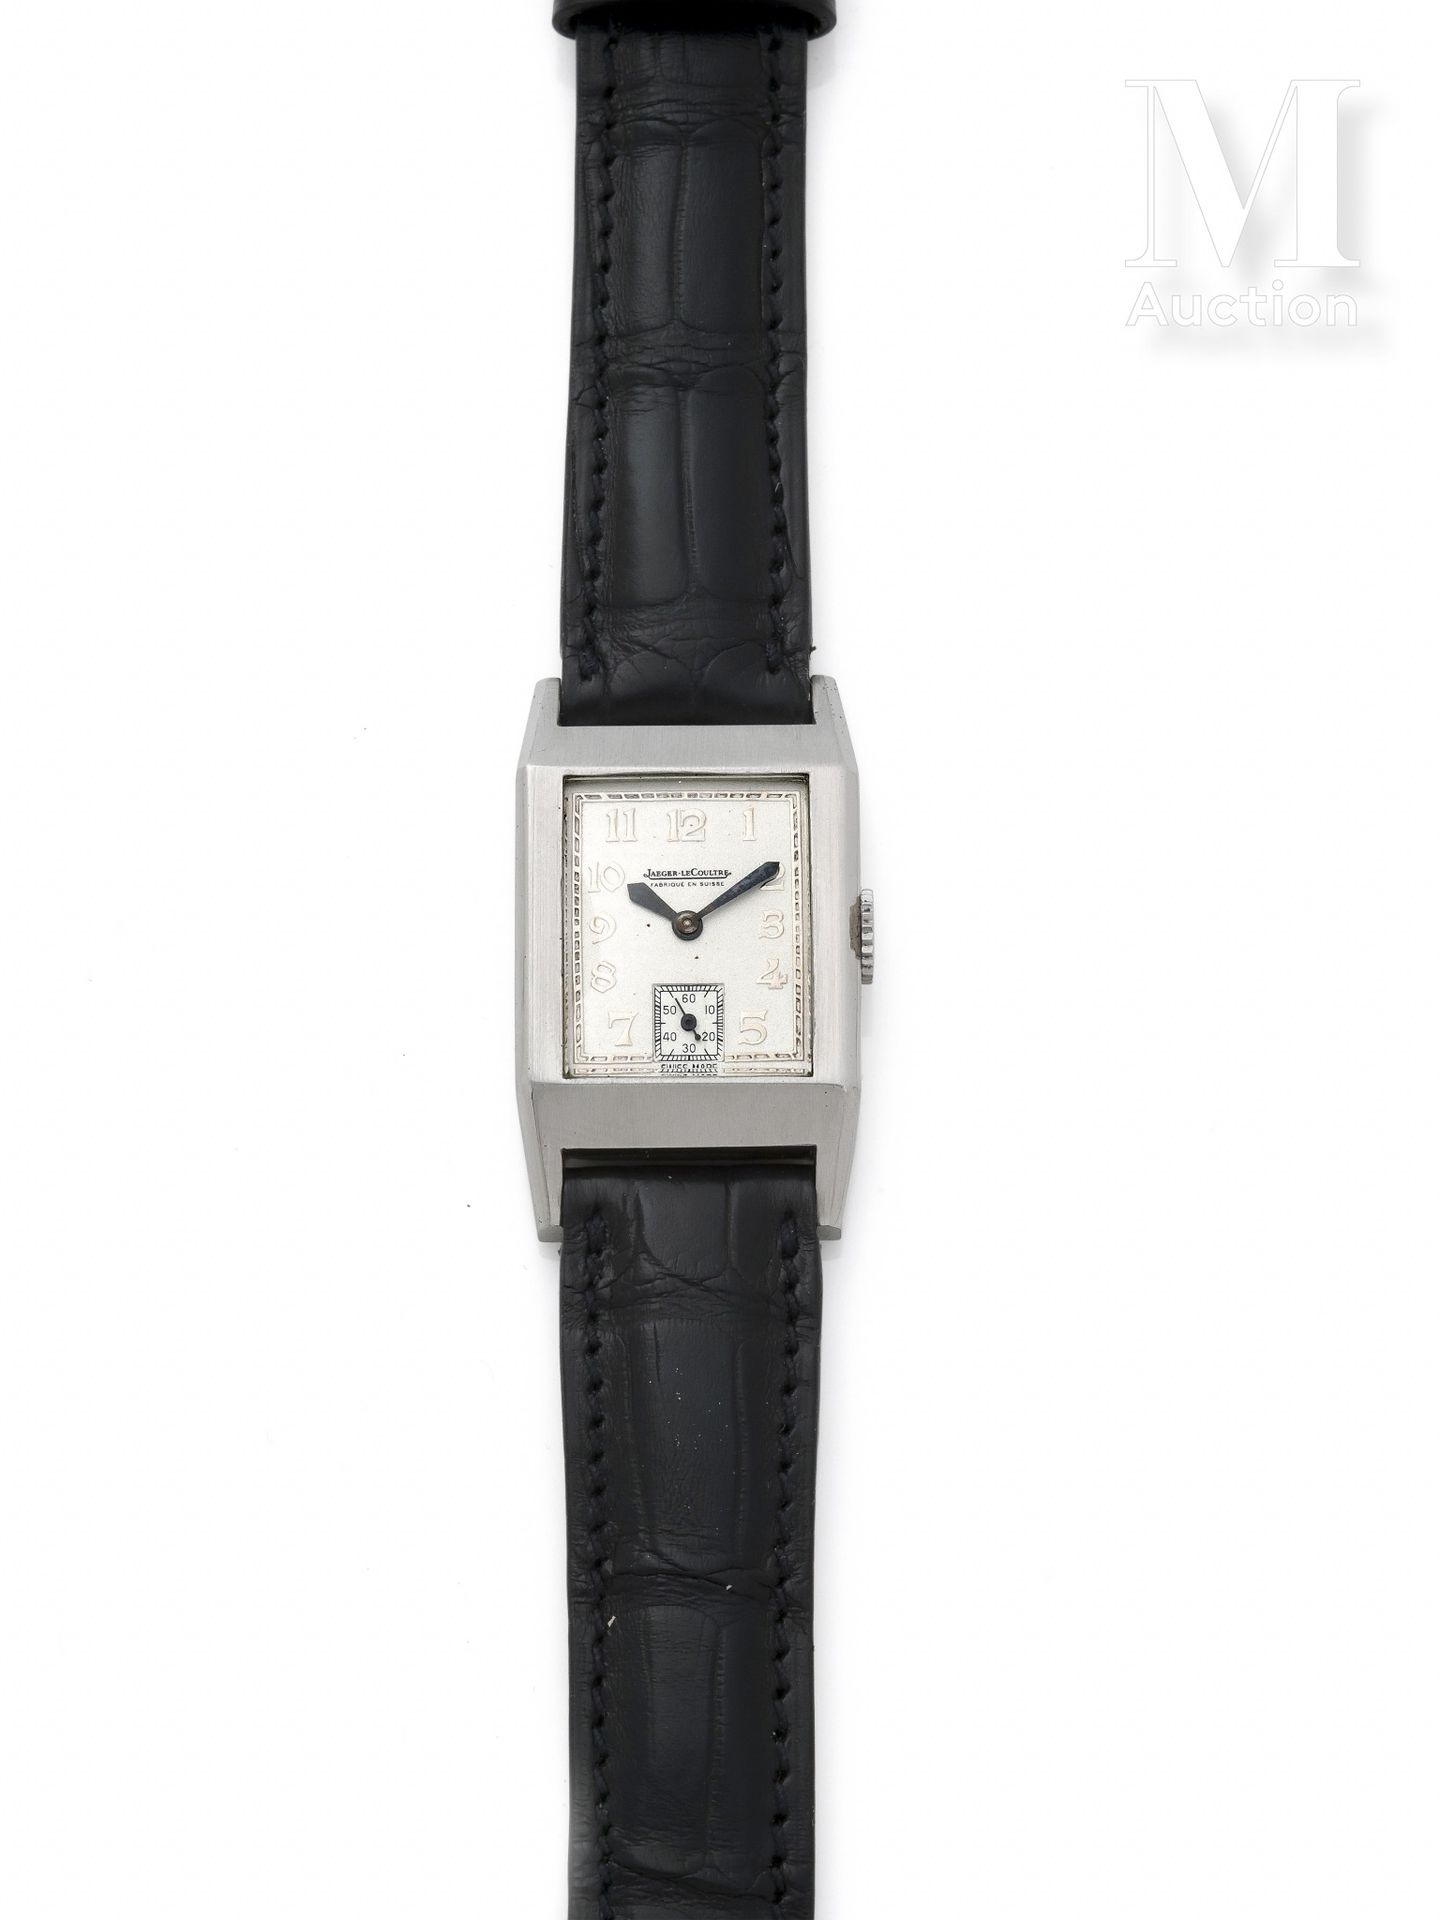 JAEGER-LECOULTRE Circa 1930

Beautiful and elegant rectangular steel watch.

Cre&hellip;